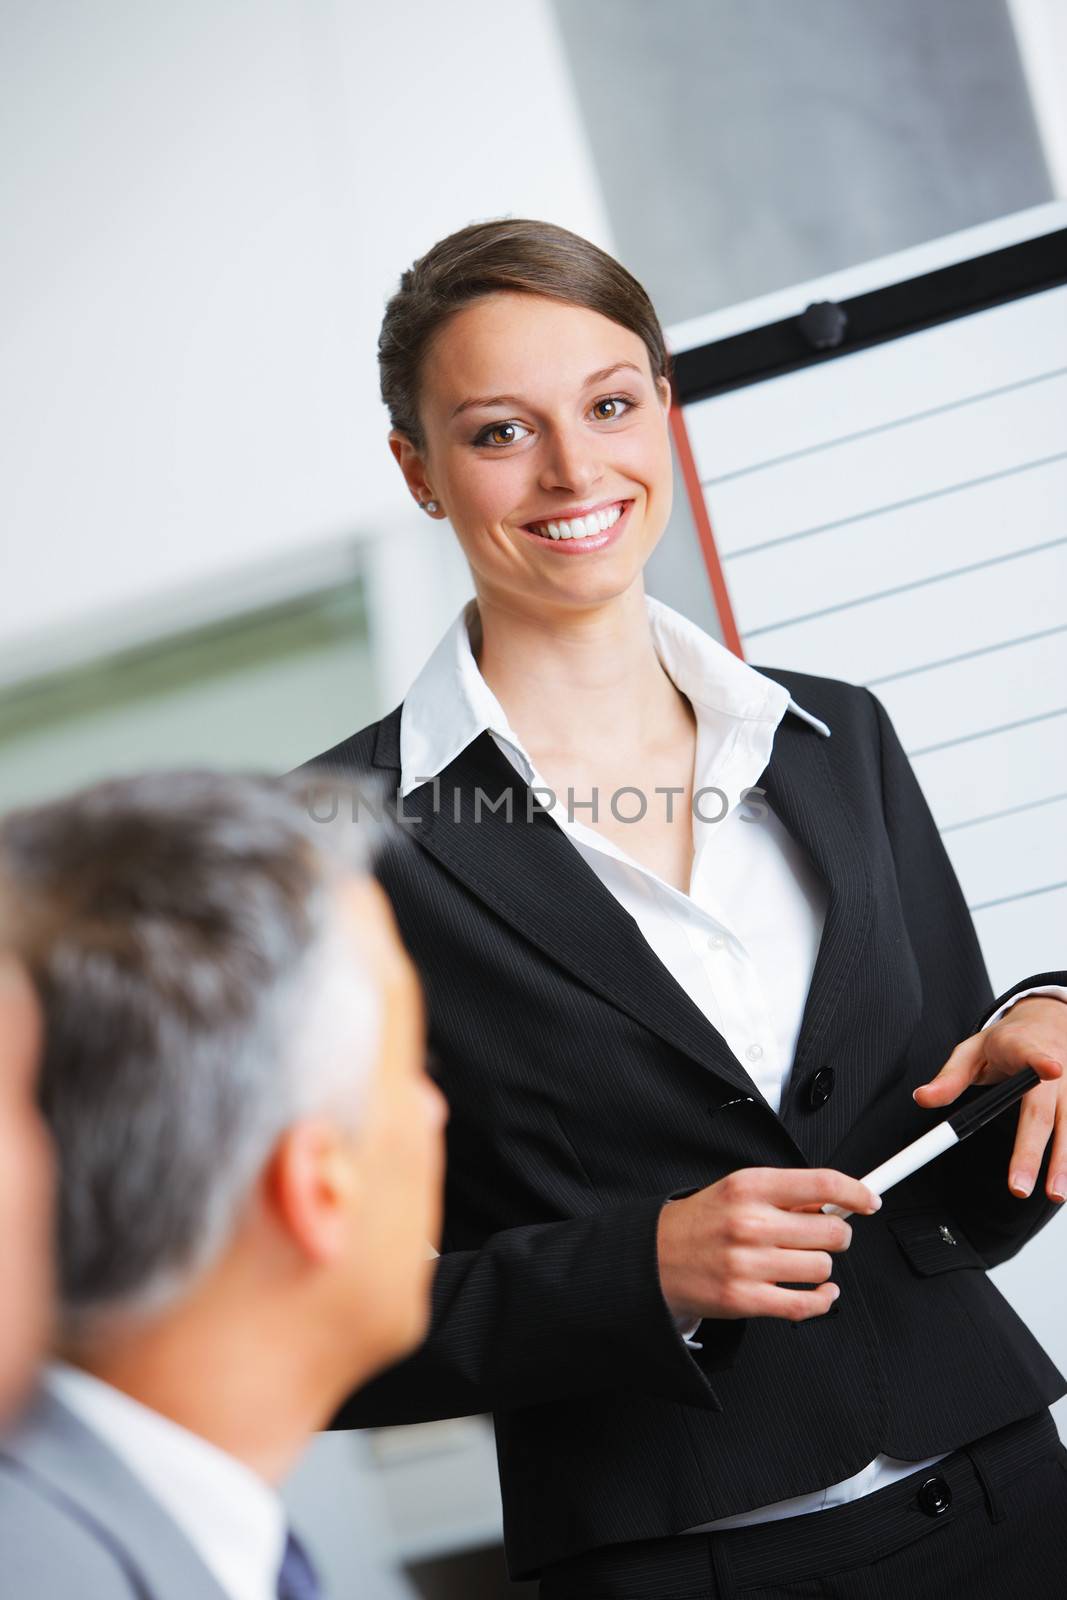 Portrait of a smiling businesswoman giving a presentation at work